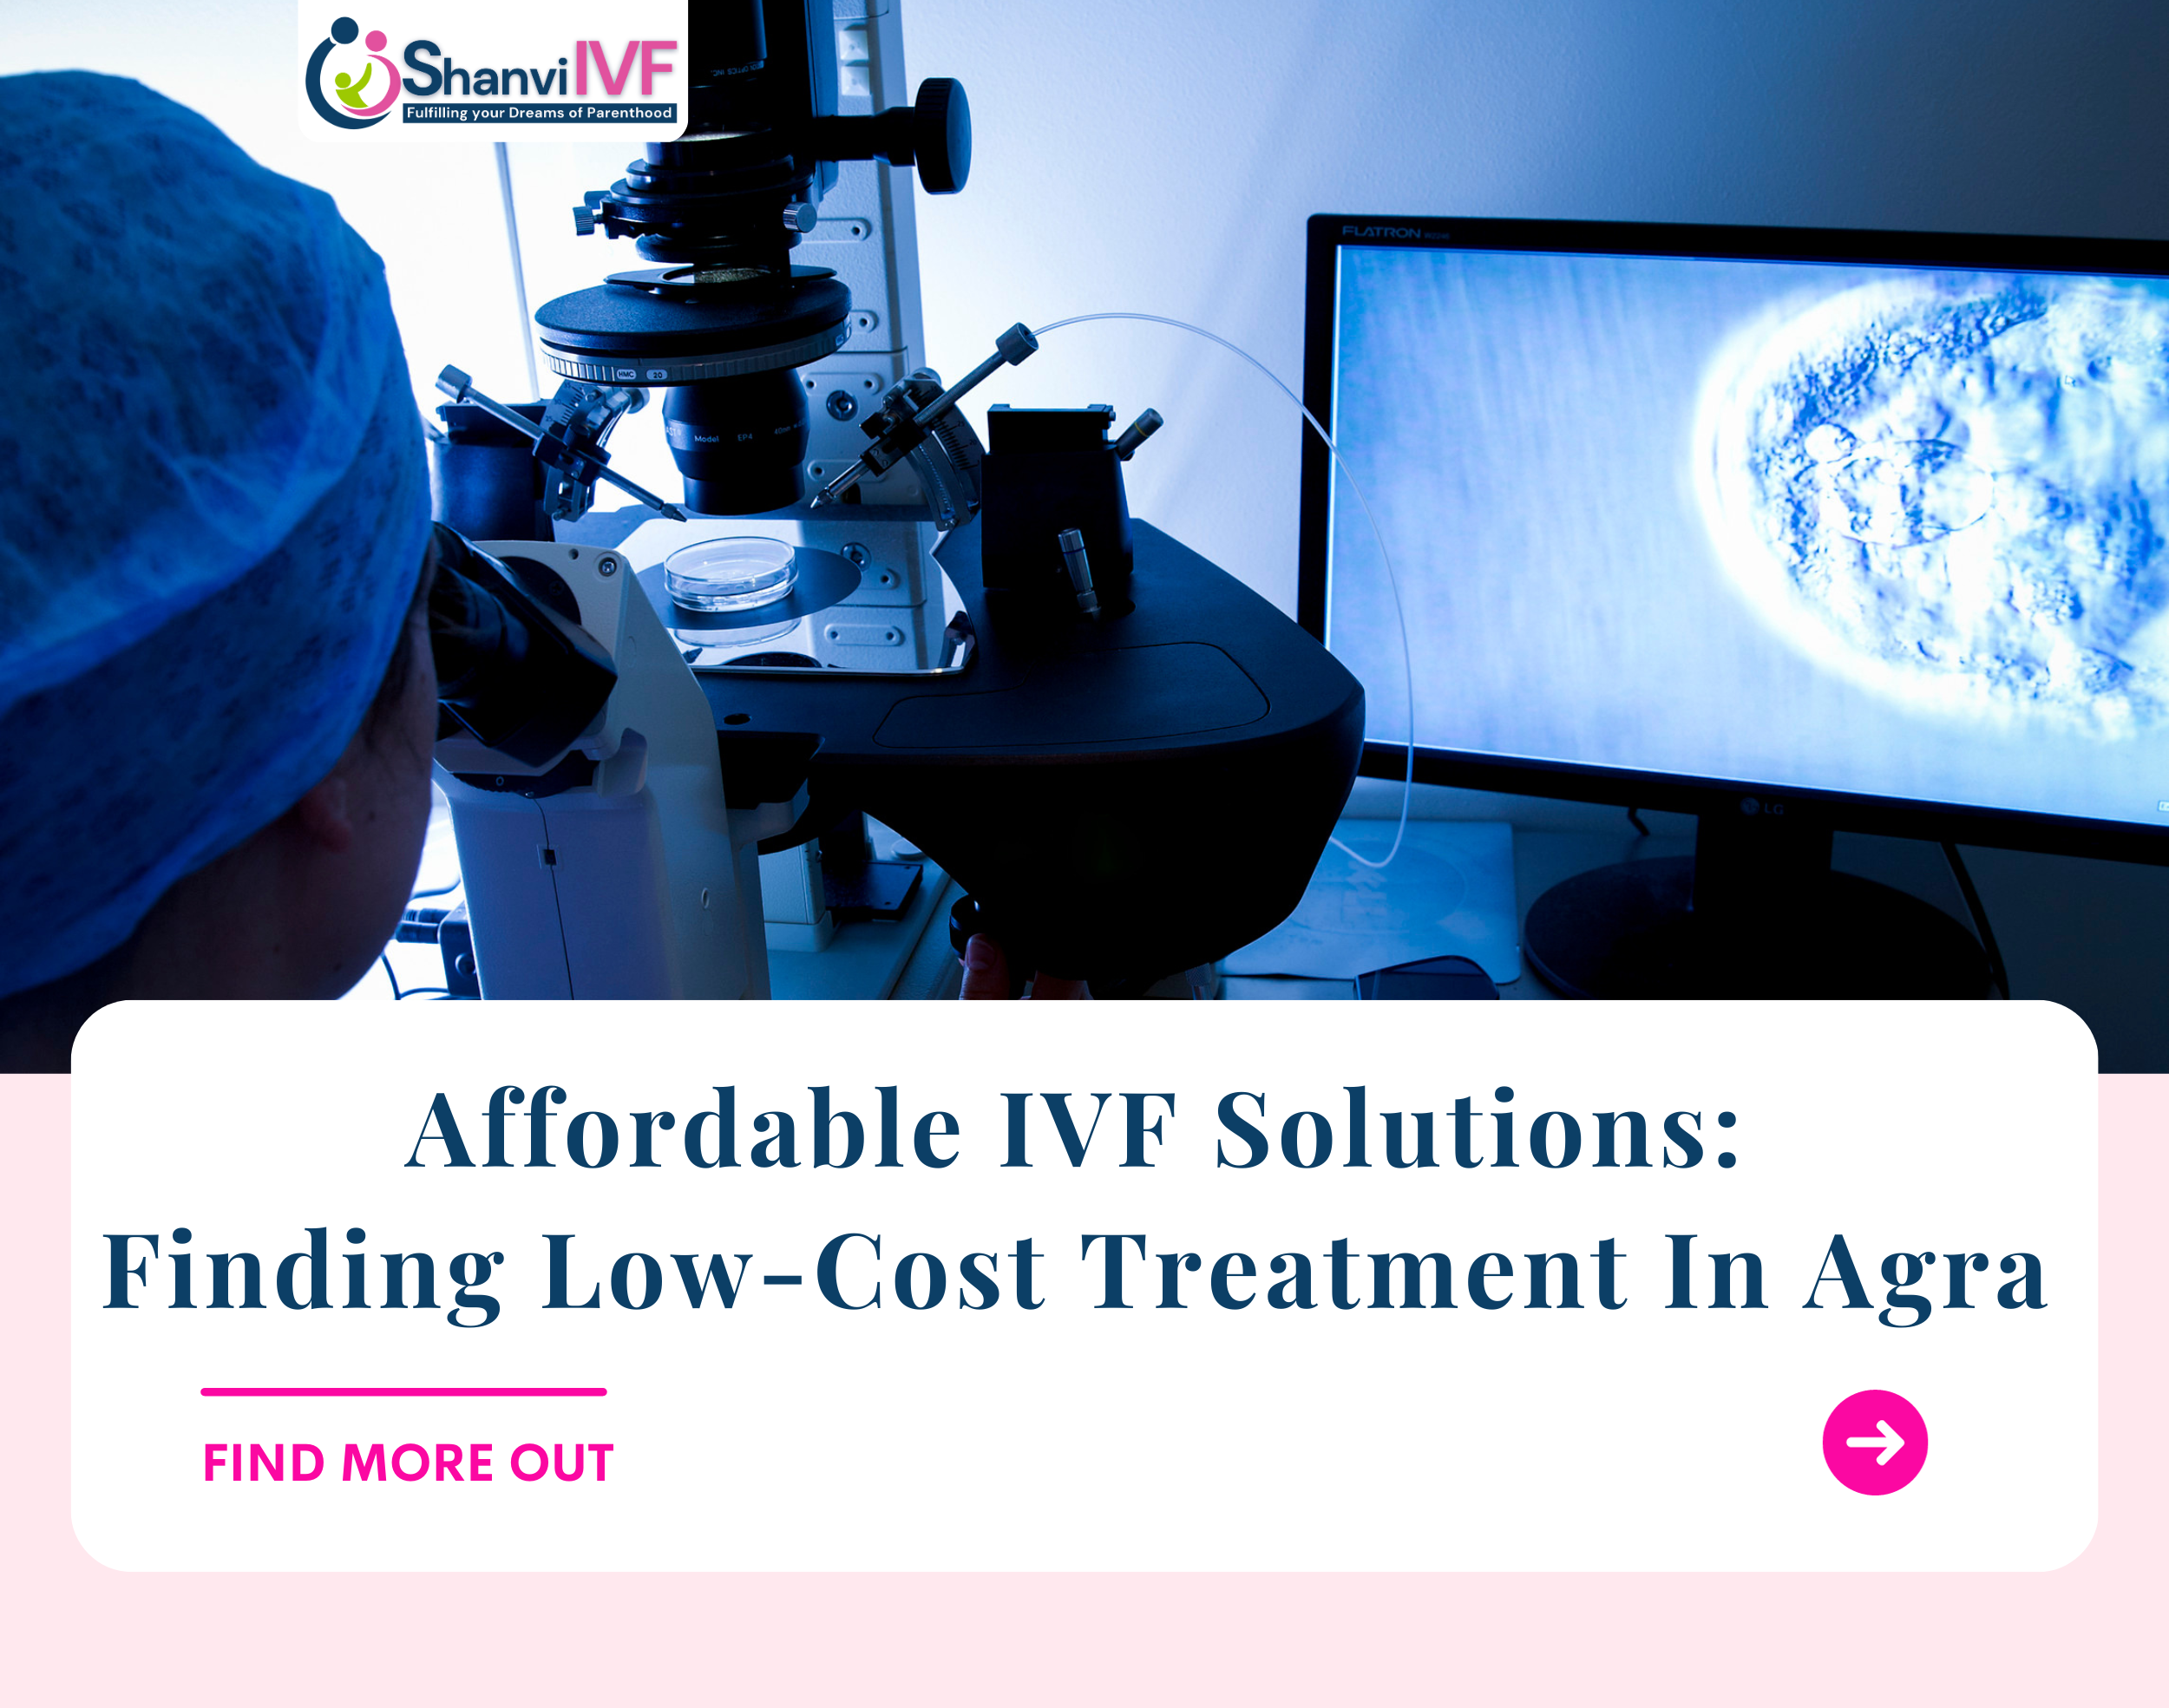 Affordable IVF Solutions: Finding Low-Cost Treatment in Agra